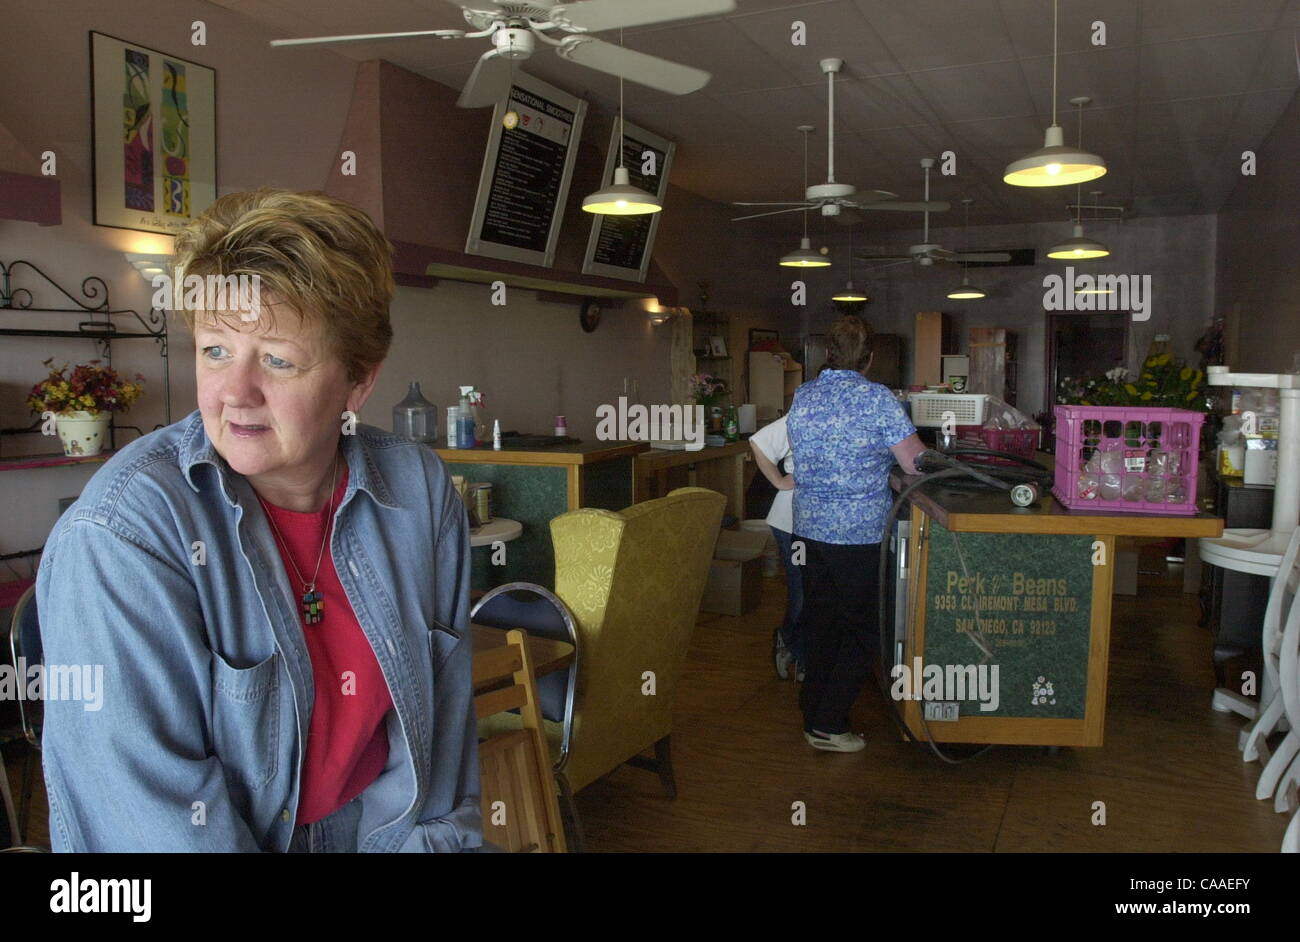 (Published 02/03/2004, E-1:1,7, UTS1786944) Sally Winter gazes outthe window of her former Del Cerro coffeehouse, Perk & Beans, as friends help clean up the ruins. Skyrocketing rent is causing the closure of the 6 1/2 year old neighborhood treasure. The last weekend it was open over 300 people stopp Stock Photo